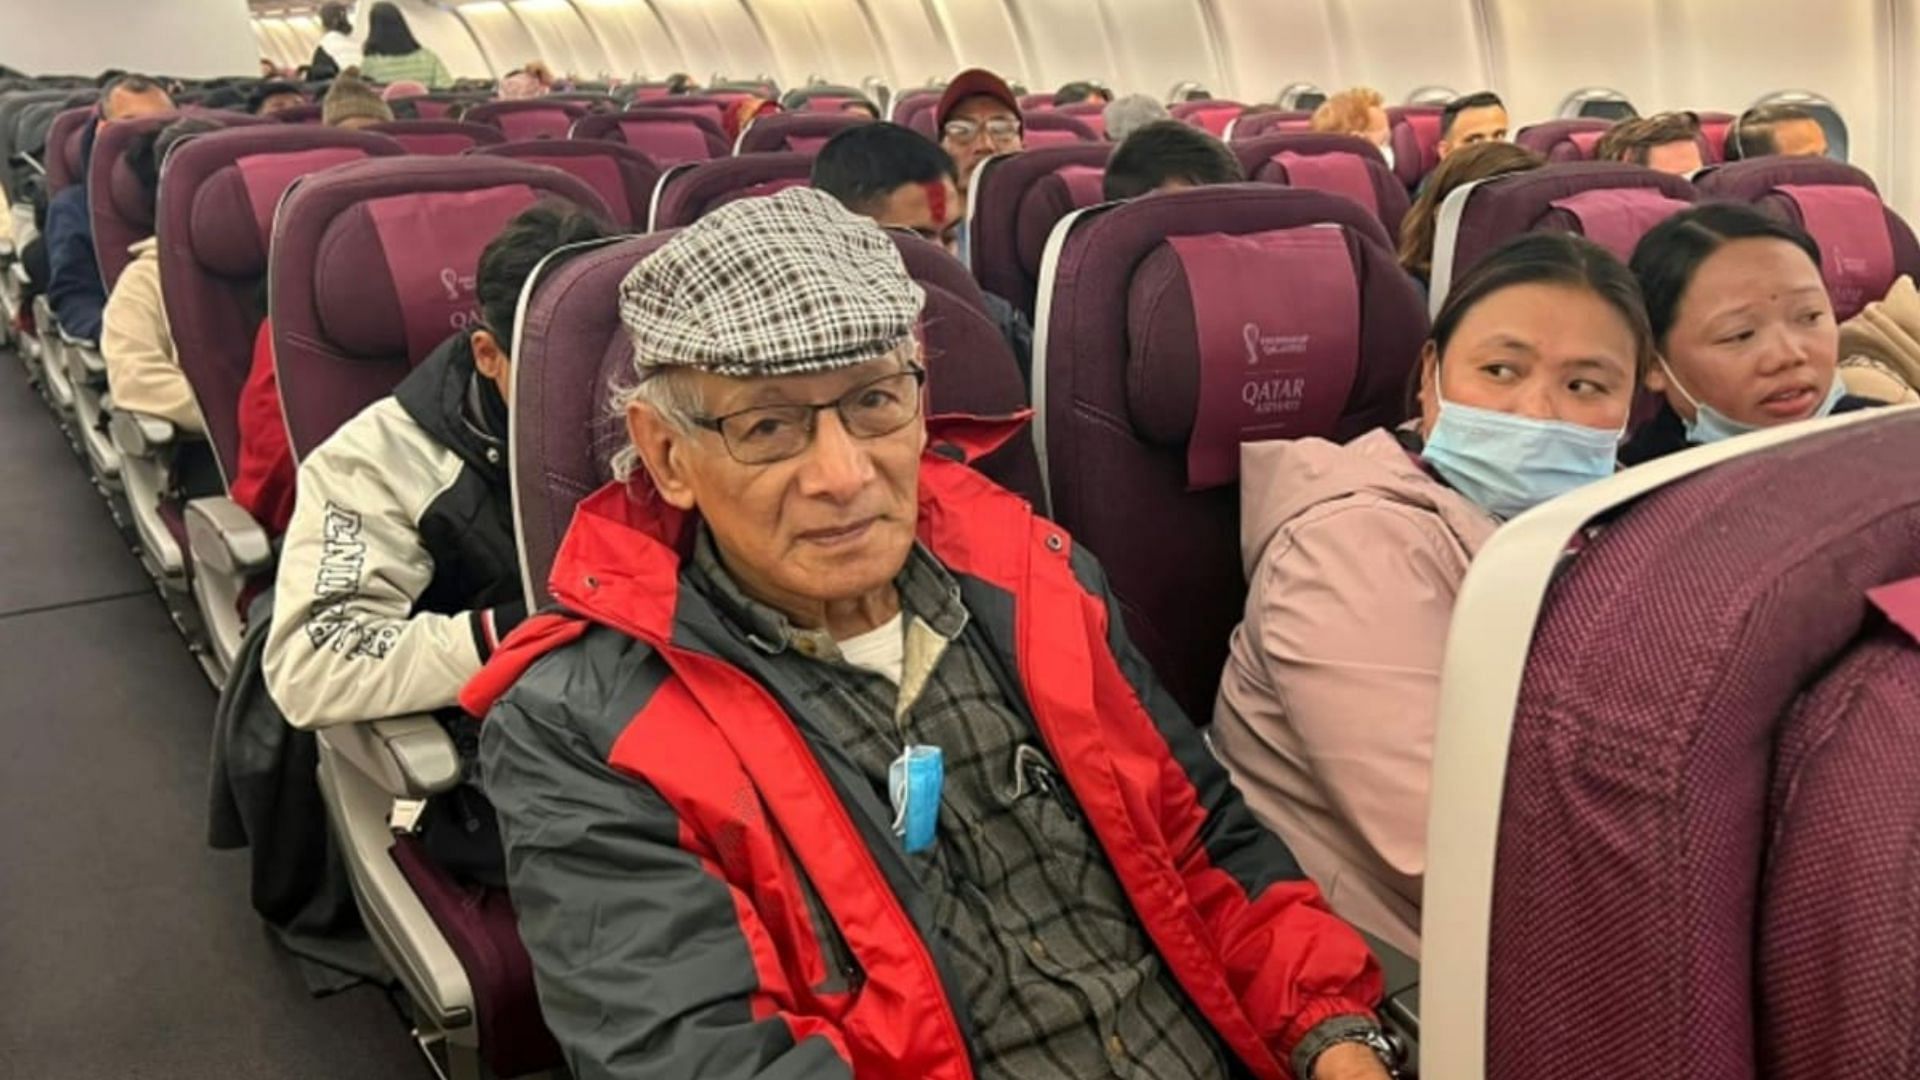 After nearly two decades, convicted serial killer Charles Sobhraj was released from prison in Nepal and deported to France (Image via Getty Images)